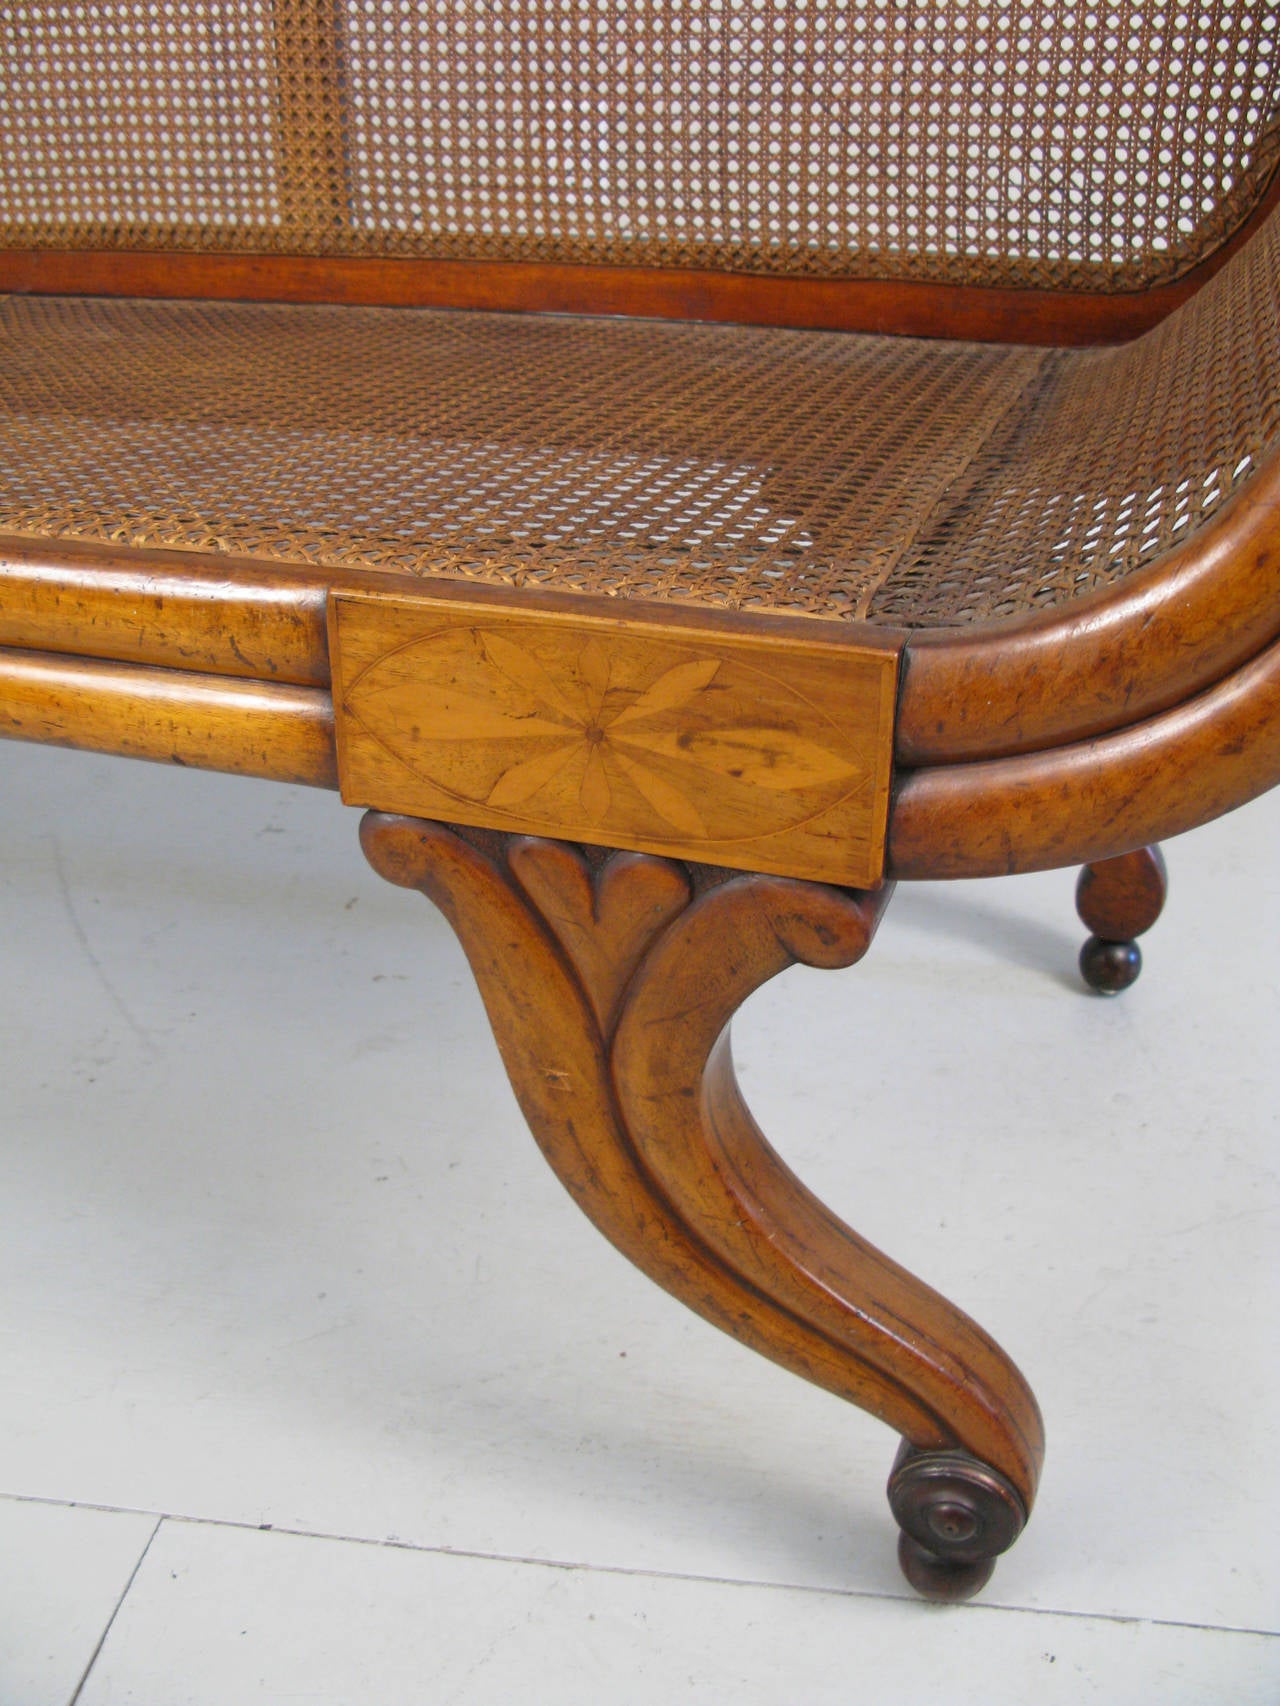 British Colonial Spectacular 19th Century Anglo-Caribbean Caned Settee